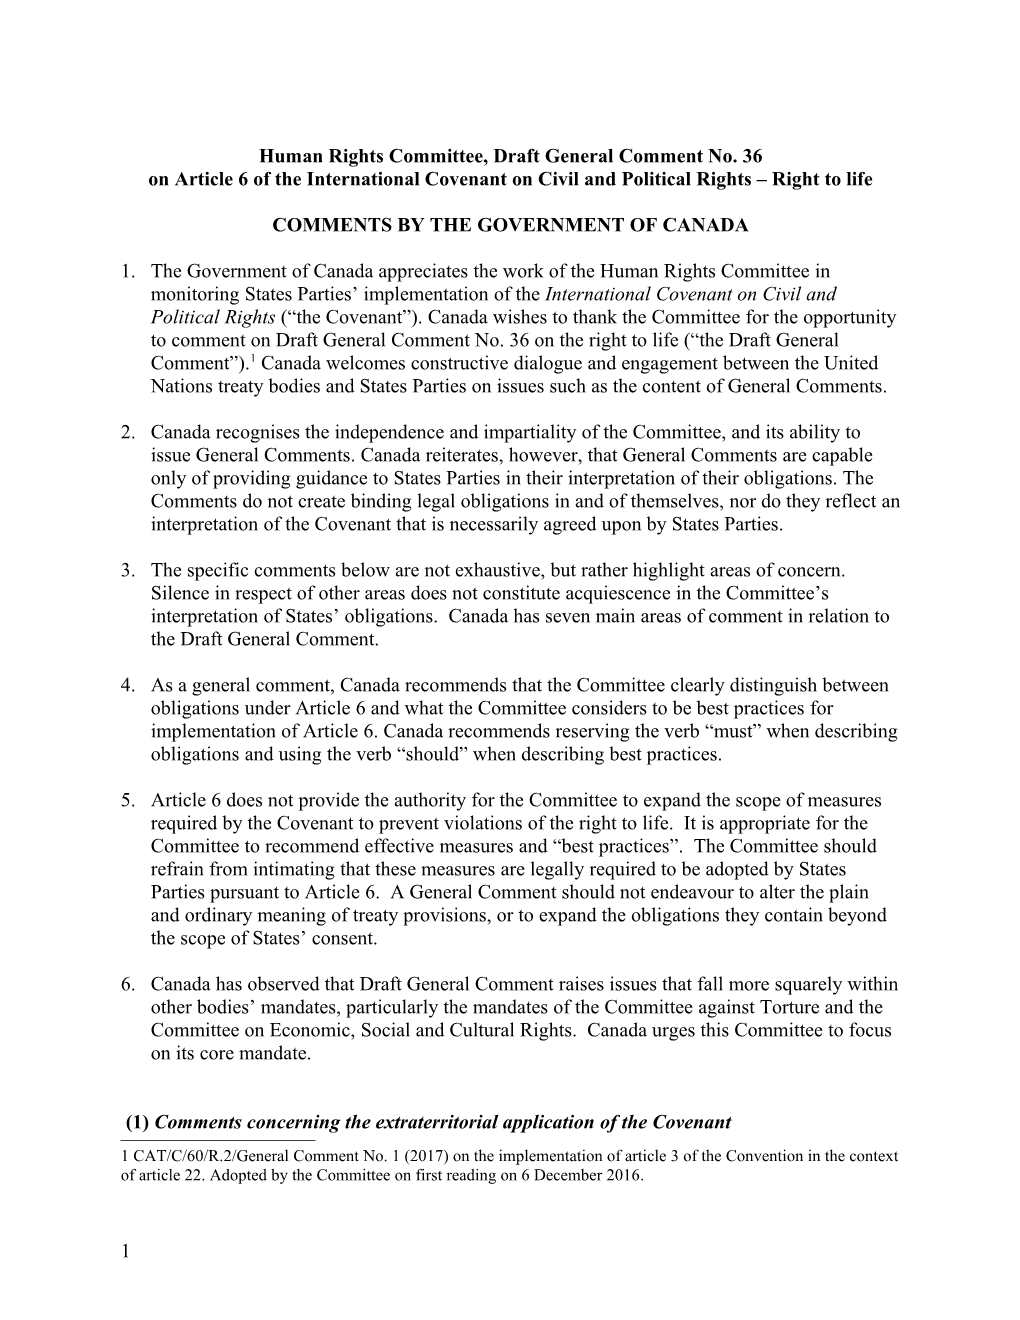 Human Rights Committee, Draft General Comment No. 36